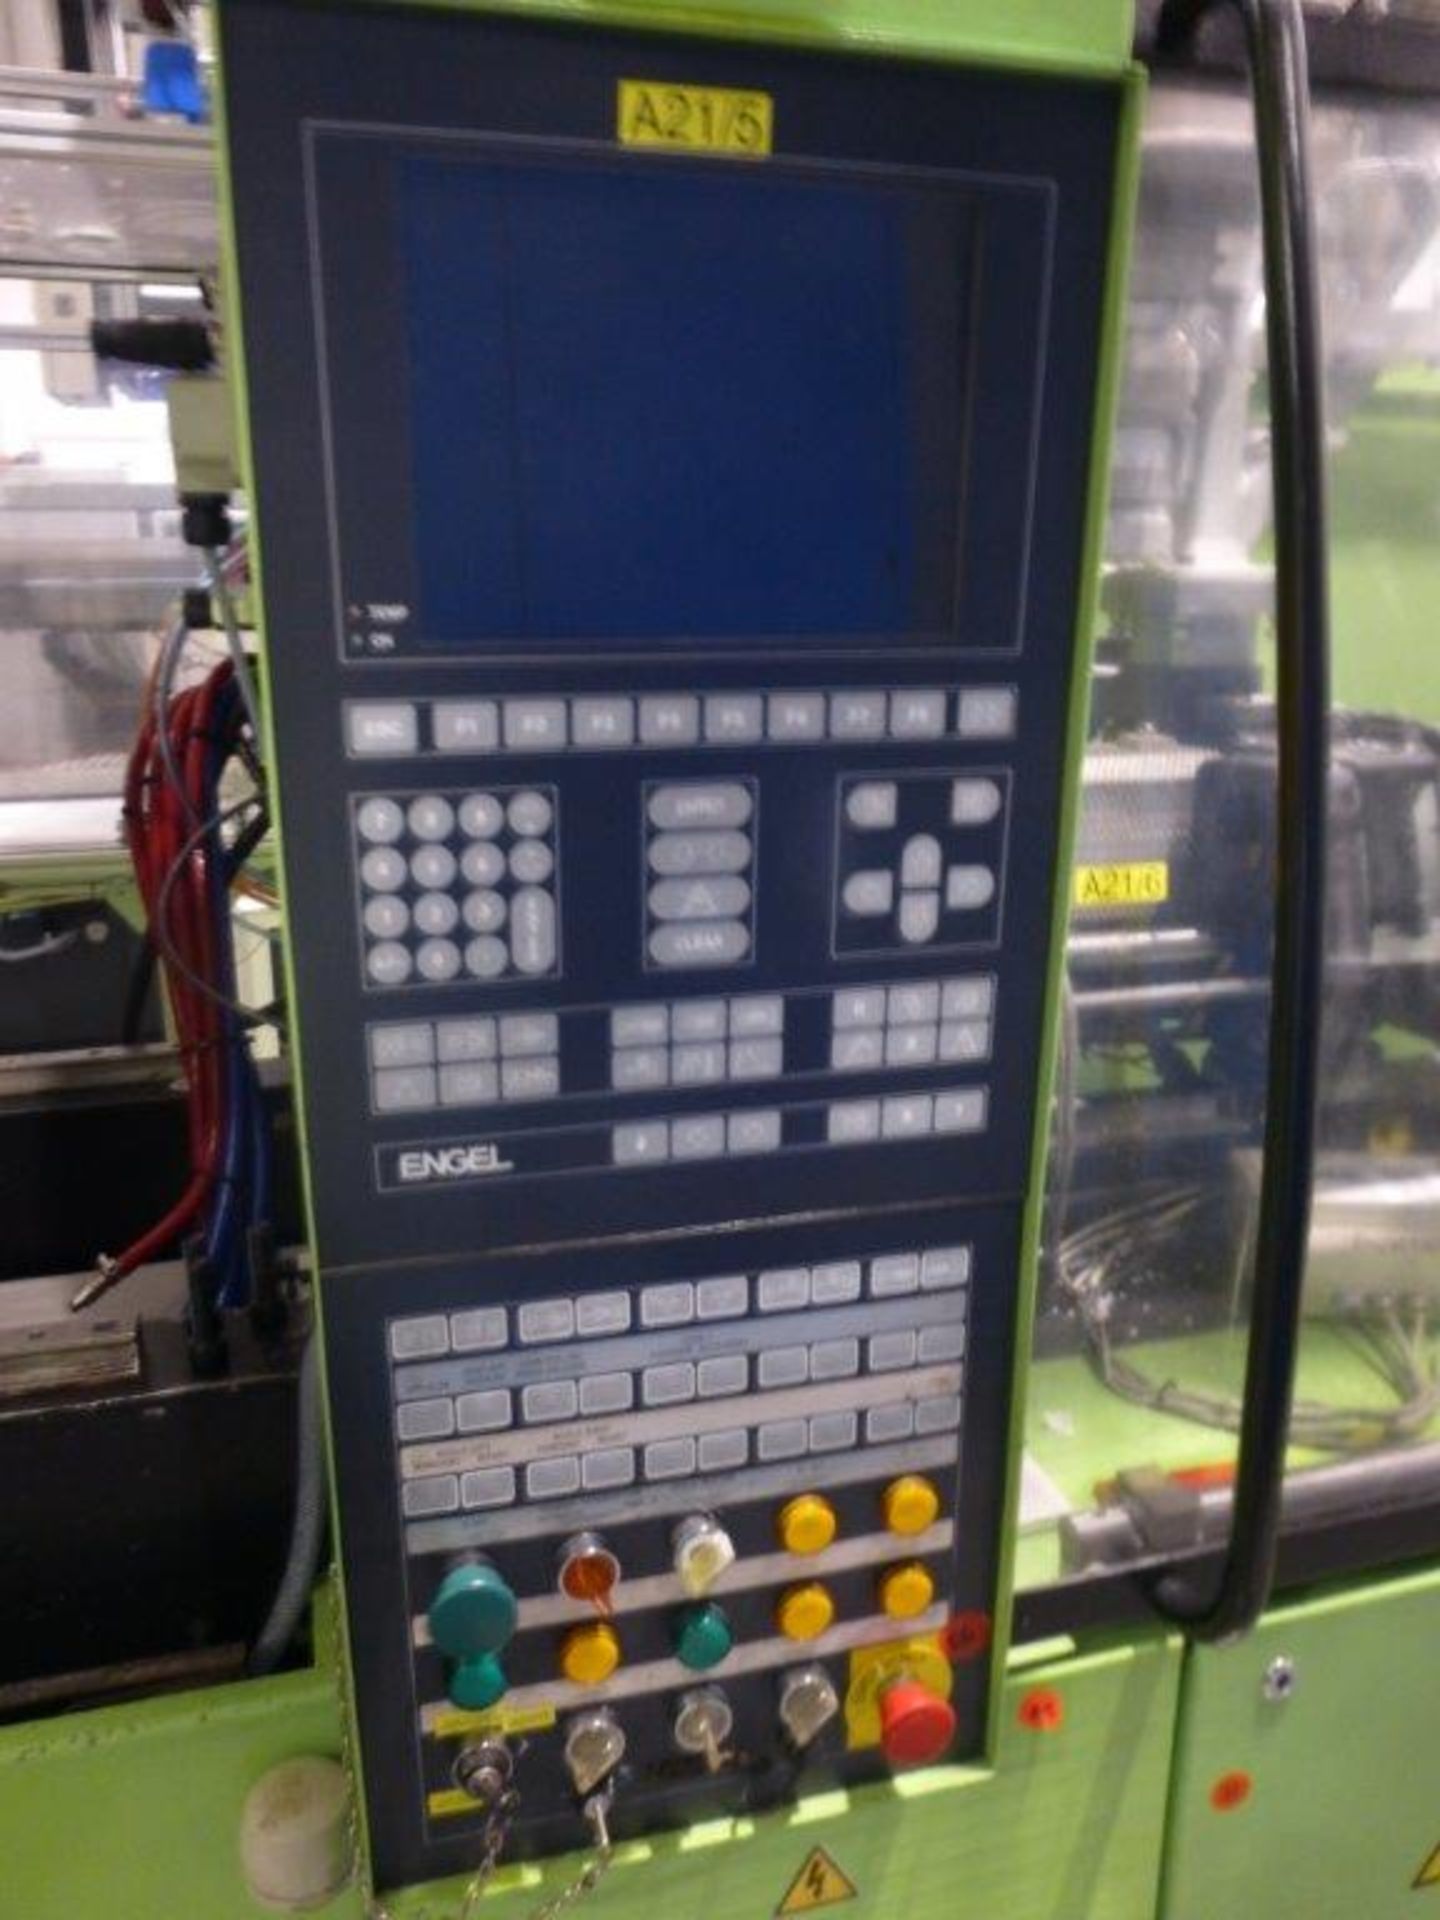 Engel ES200/50HL CNC Plastic Injection Moulding Machine Serial No. 31803 (1997) with DBTB - Image 5 of 7